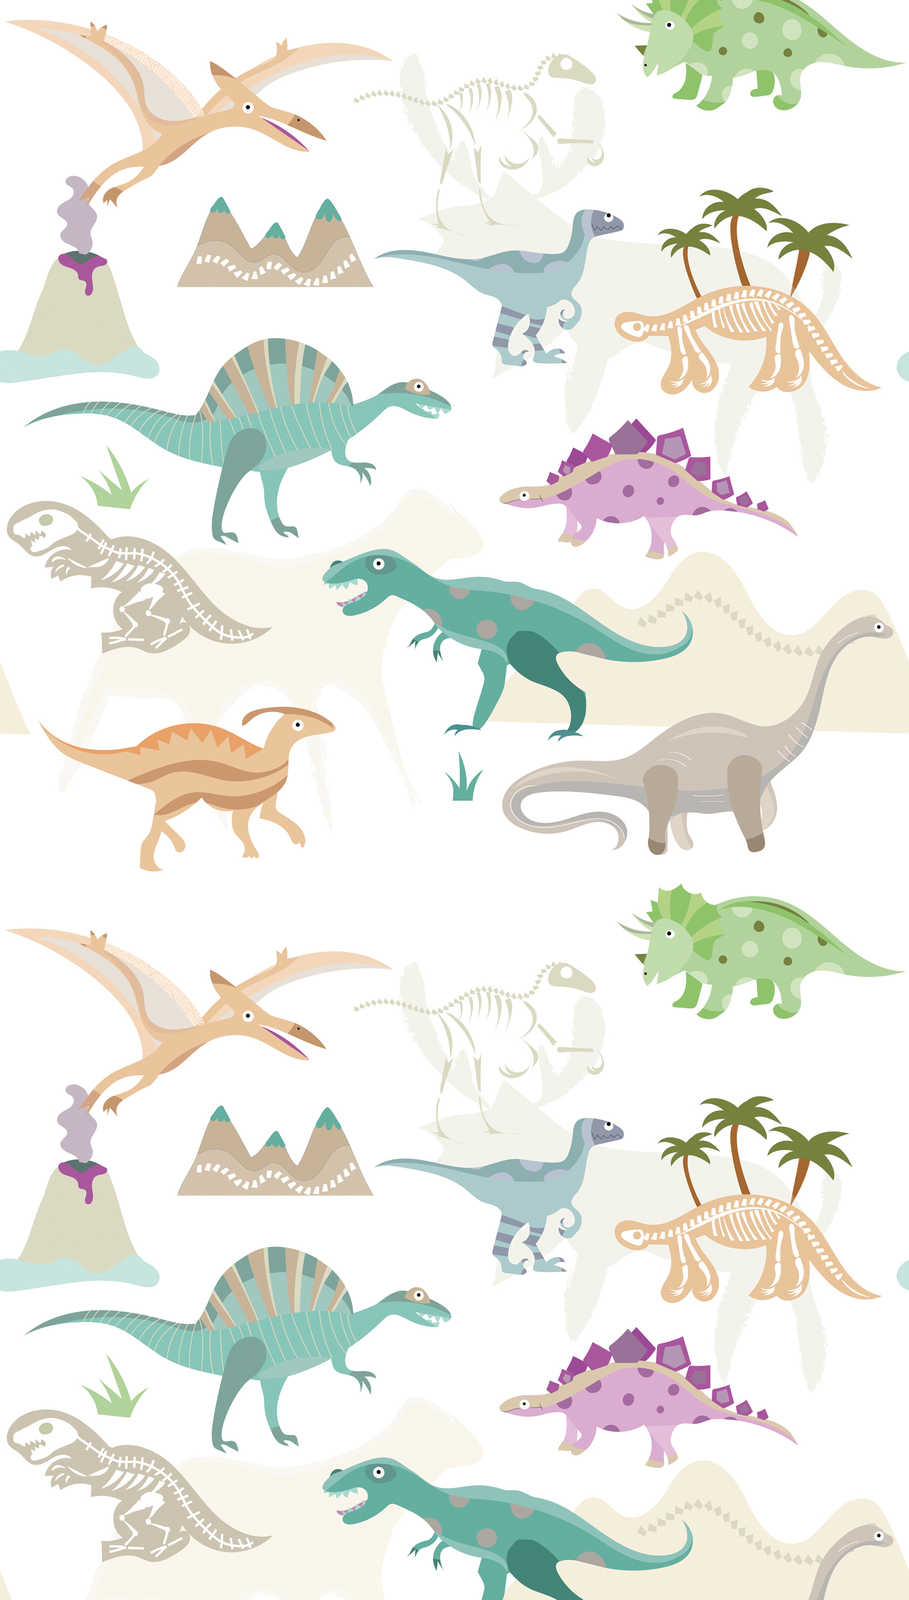             Children's motif wallpaper with dinosaurs and volcanoes - colourful, cream, beige
        